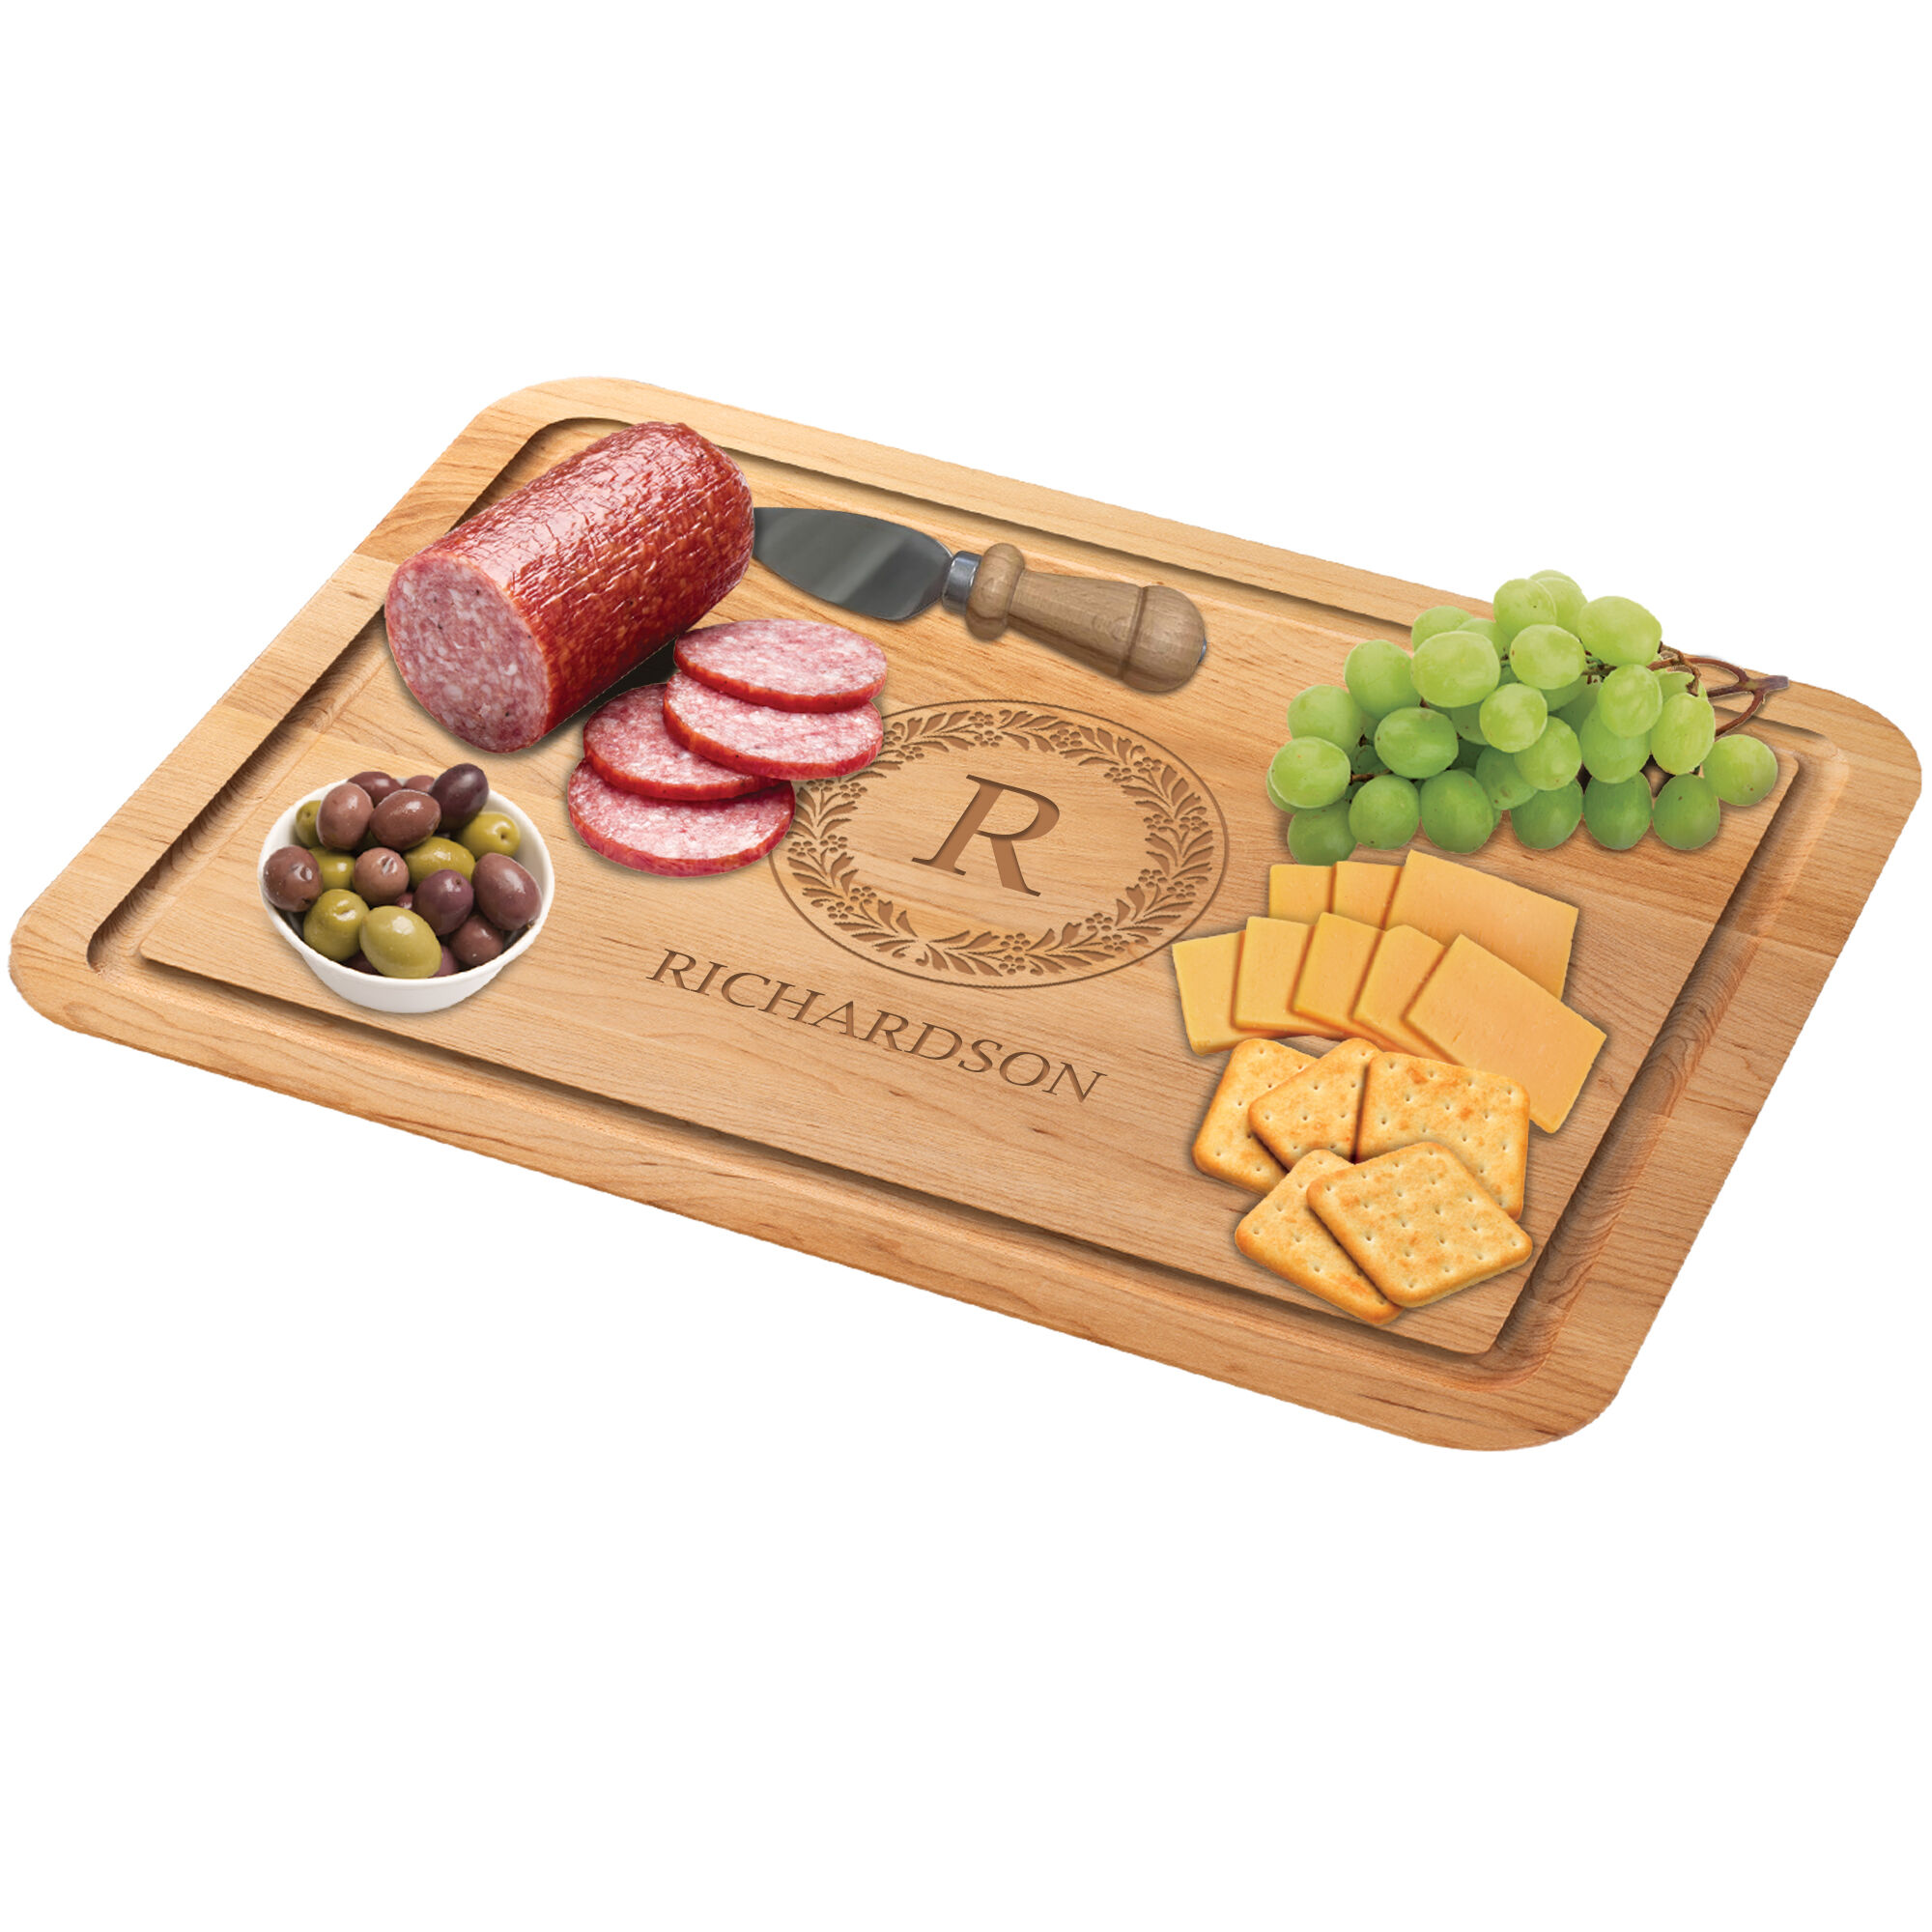 The Personalized Maple Cutting Board with Free Knife 1468 0037 c meat with cheese